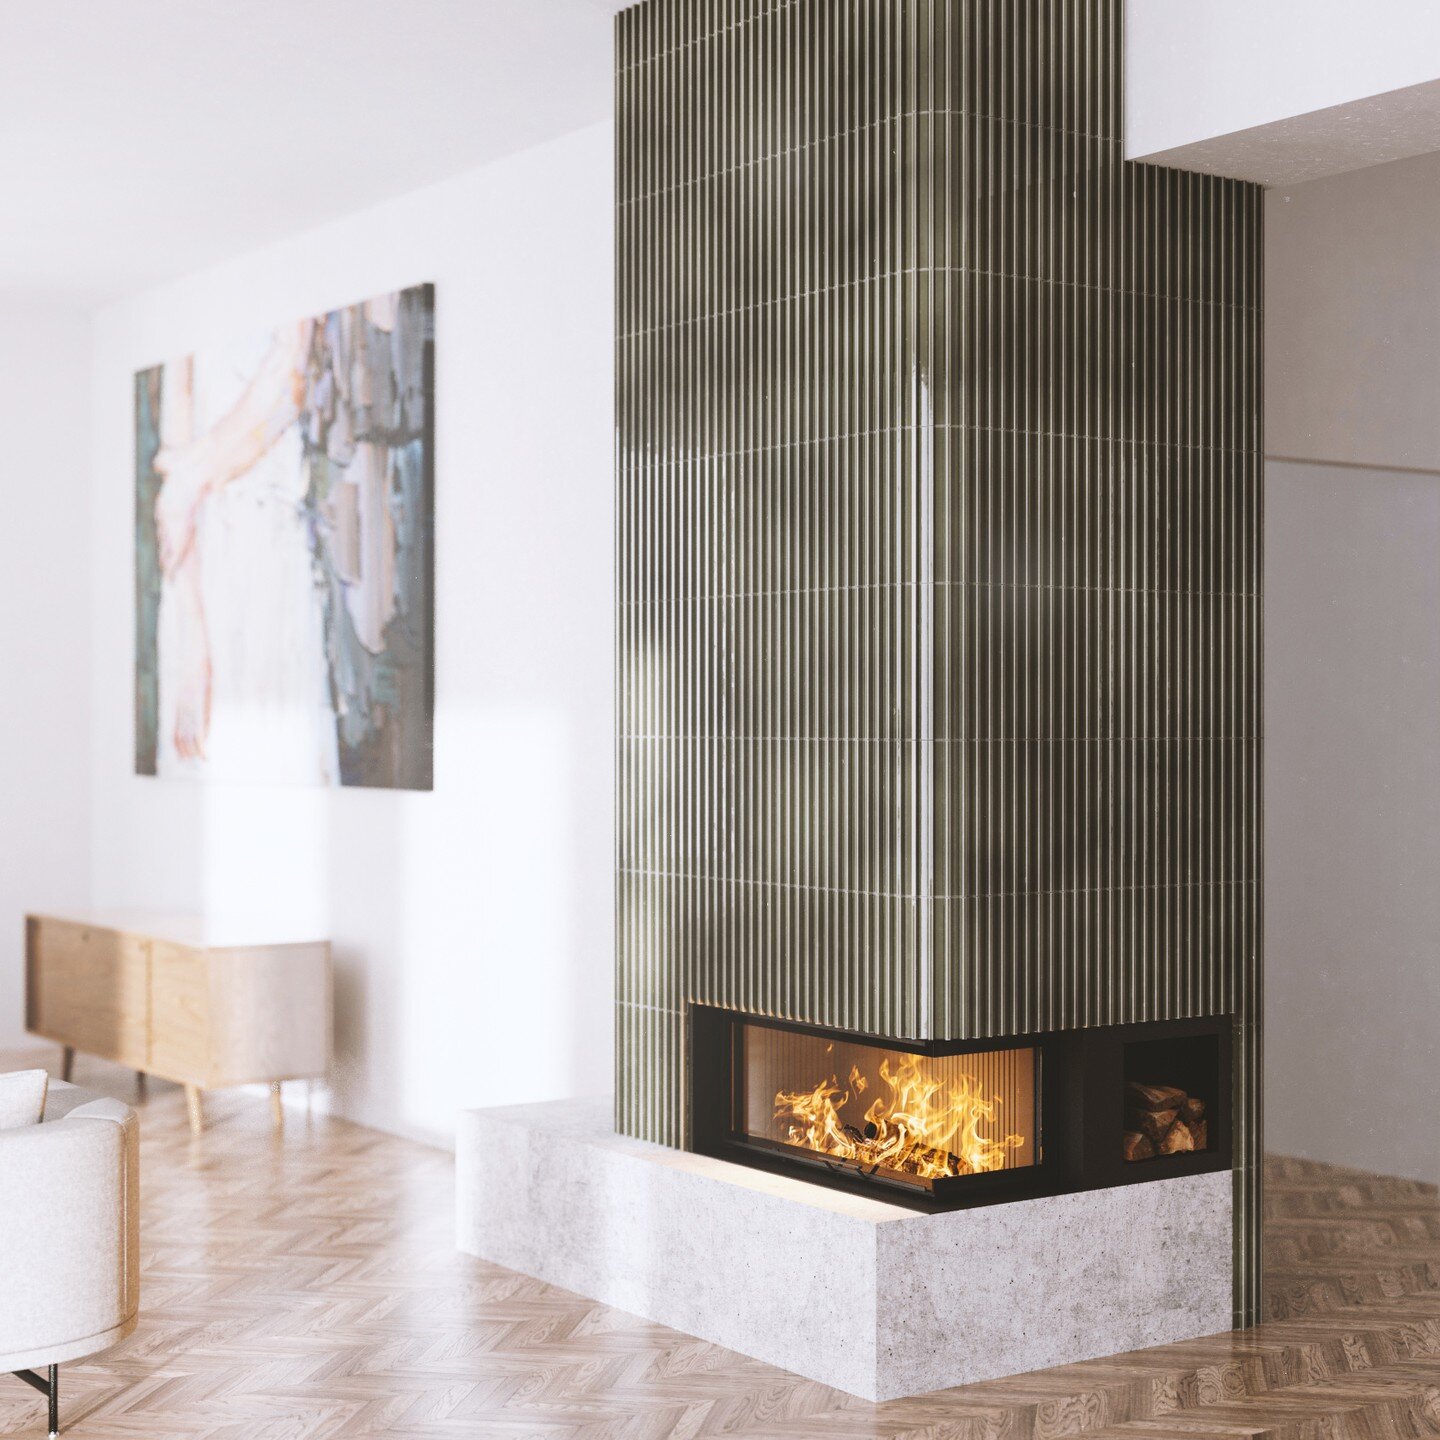 One of our latest designs with a Hoxter ECKA 90/40/40h firebox and integrated wood storage

#fireplace #tiledstove #ceramictiles #kachelofen #kamin #kaminbau #hafner #designfireplace #woodstove #interiordesign #homedesign #heating #homeinspiration #s